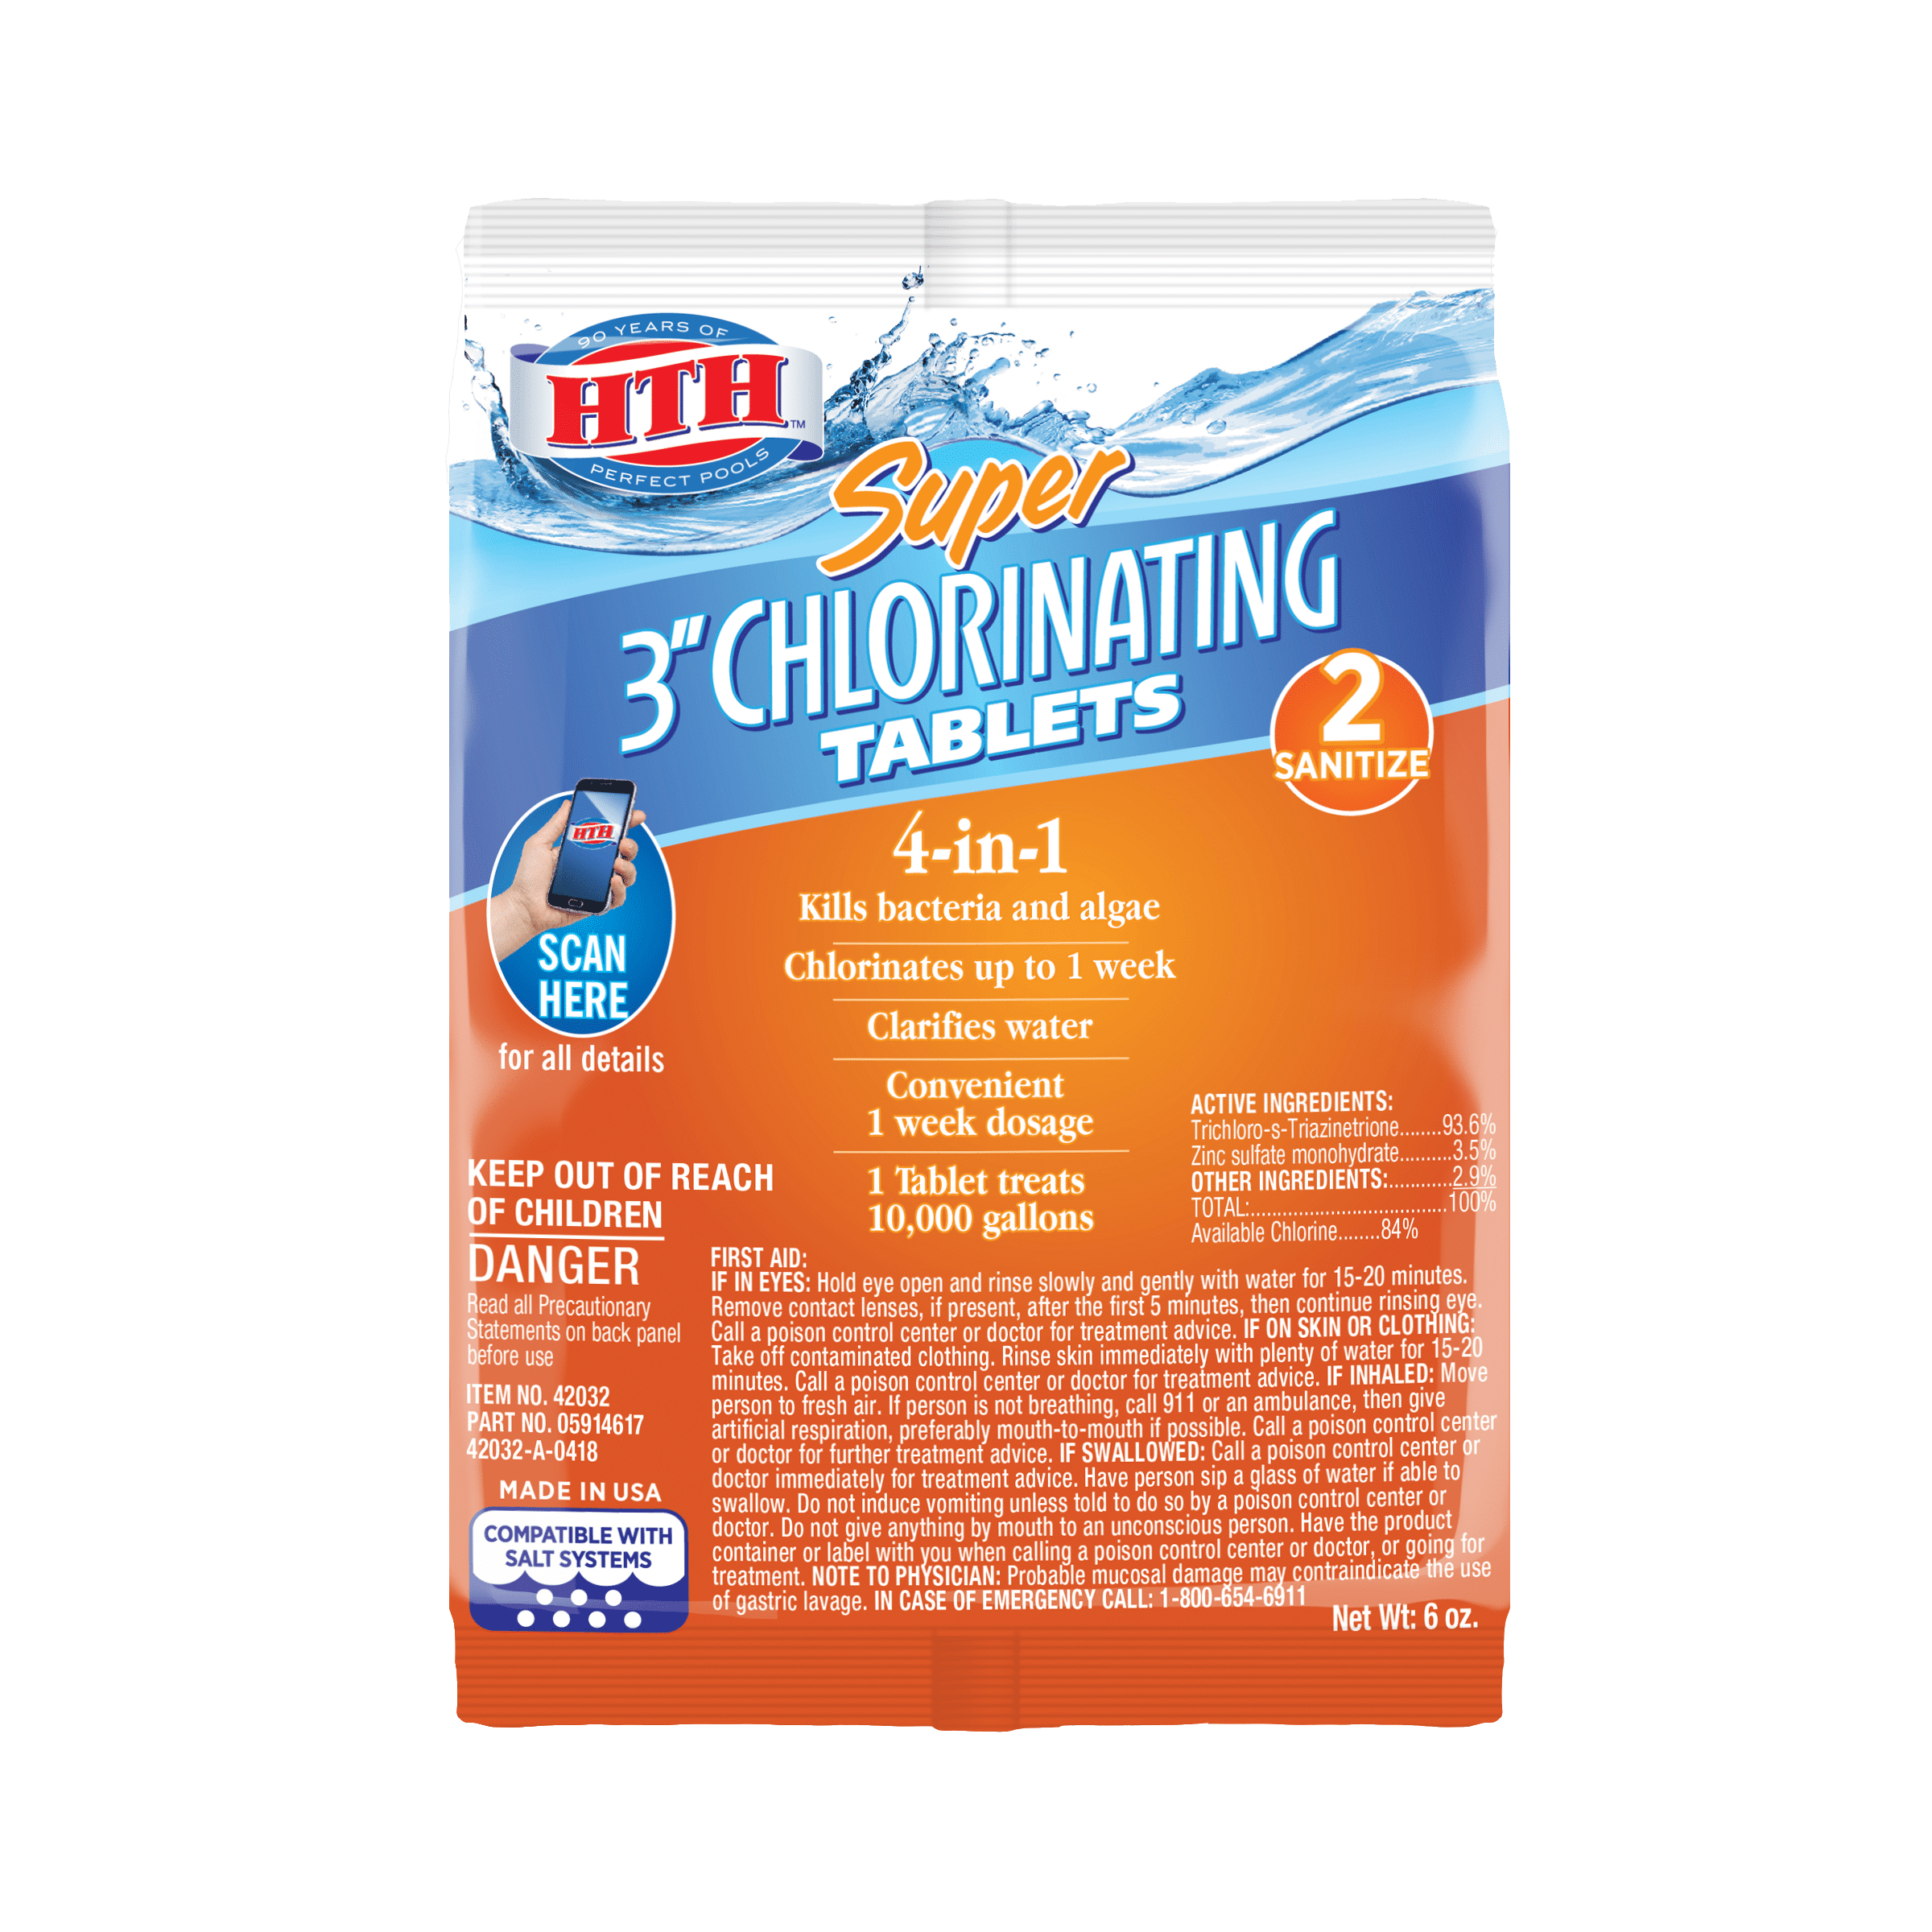 HTH Spa Clear Chlorinating Sanitizer